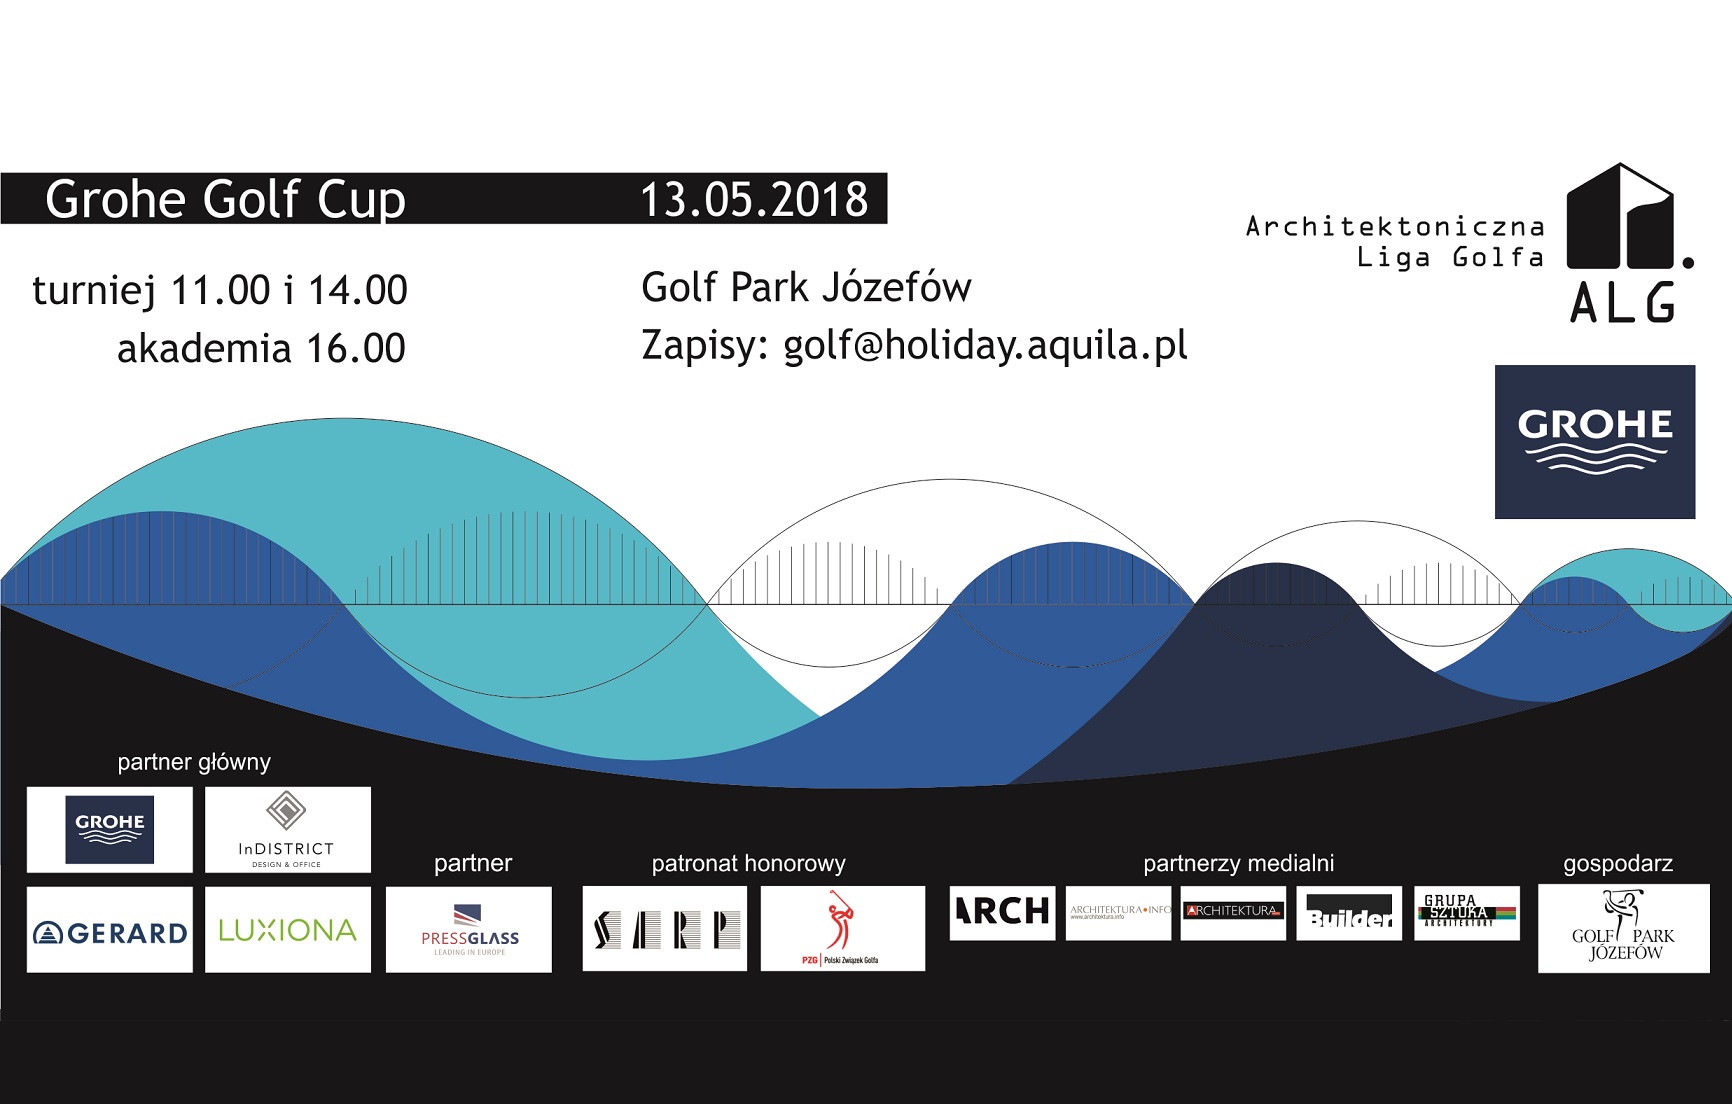 GROHE GOLF CUP